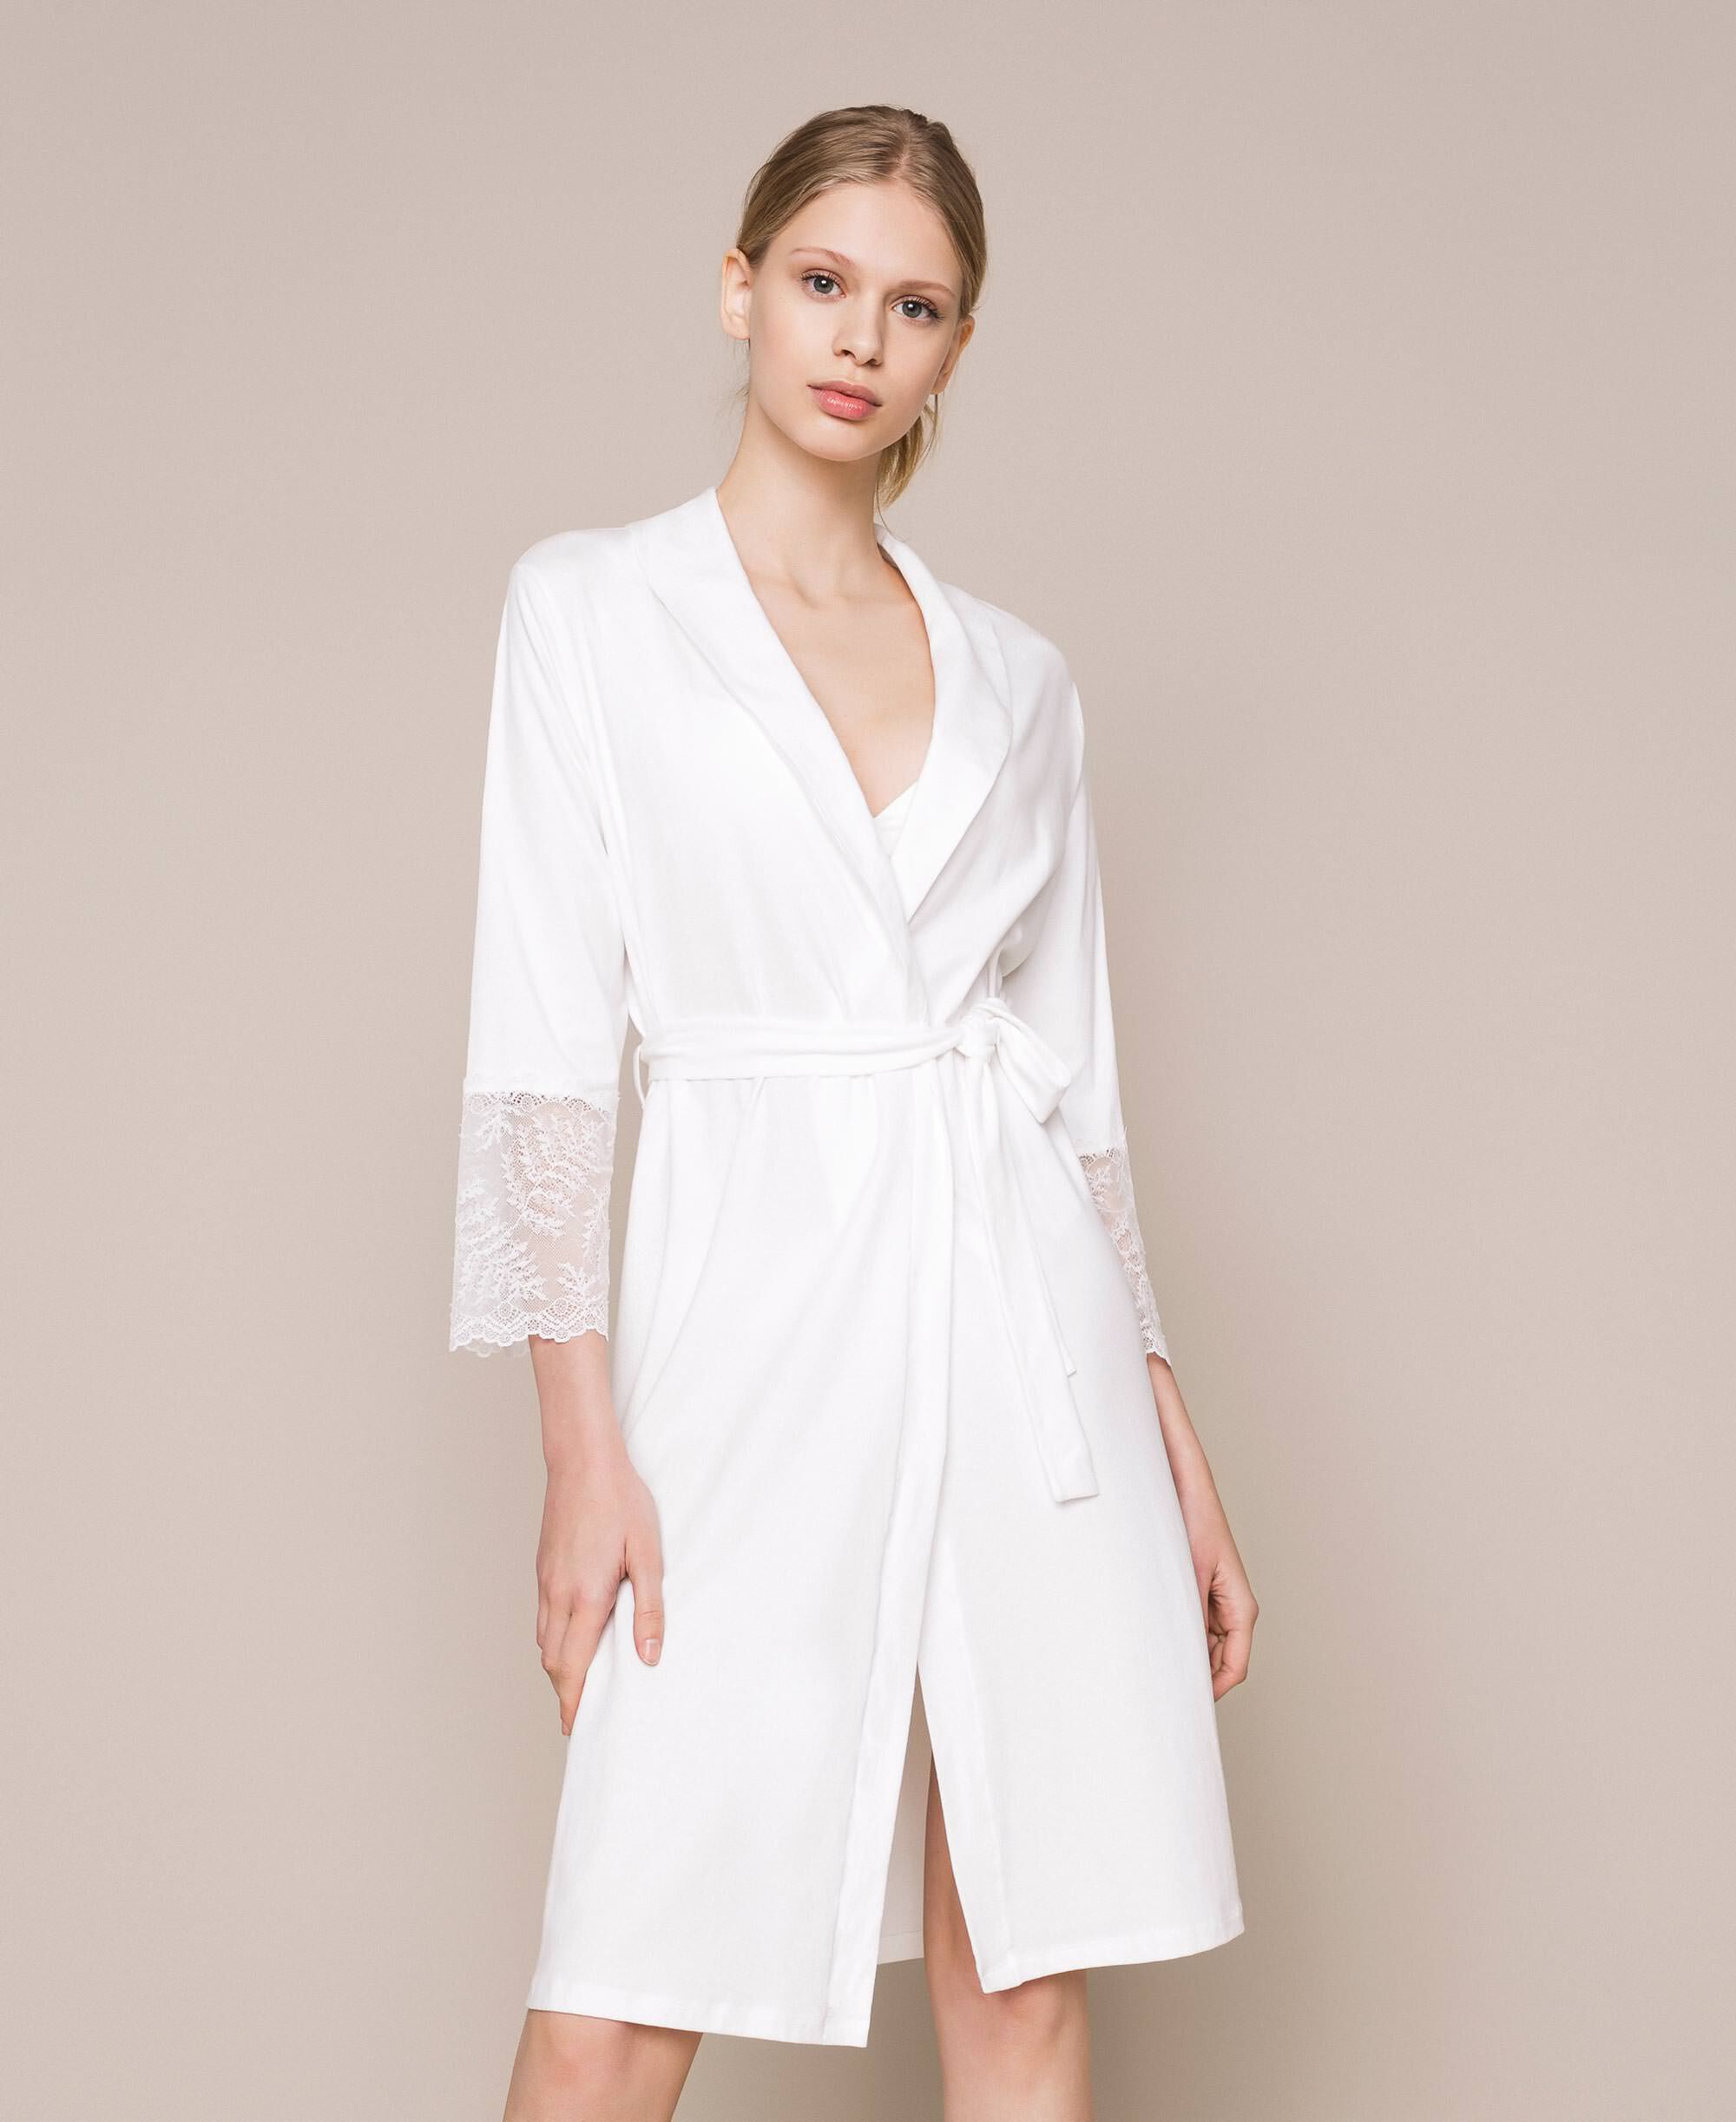 Lace dressing gown Woman, White 